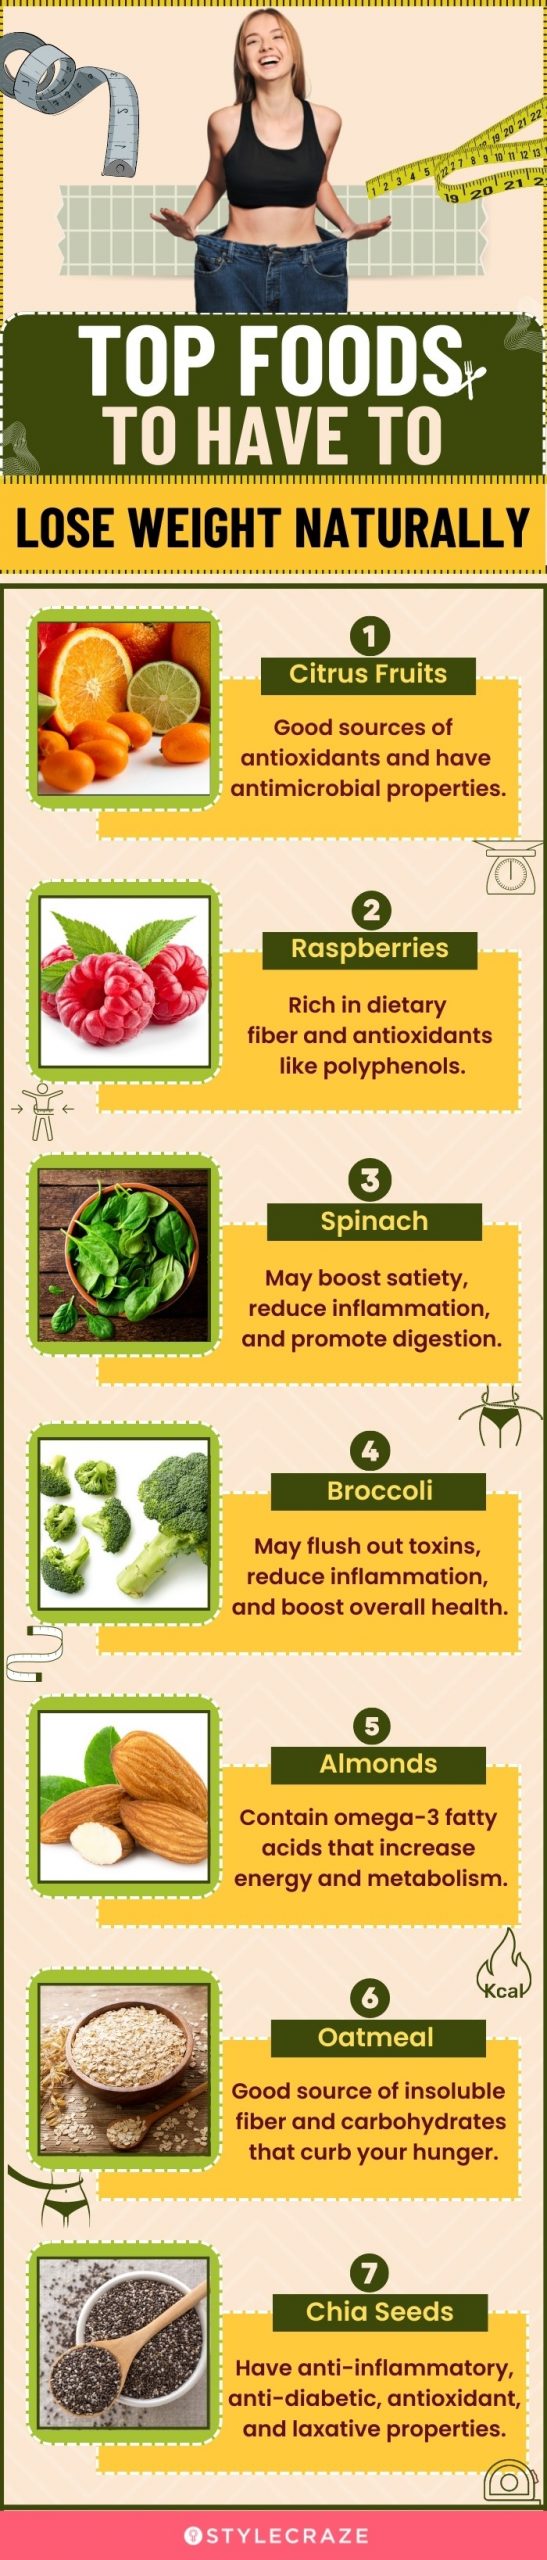 top food for weight lose naturally[infographic]